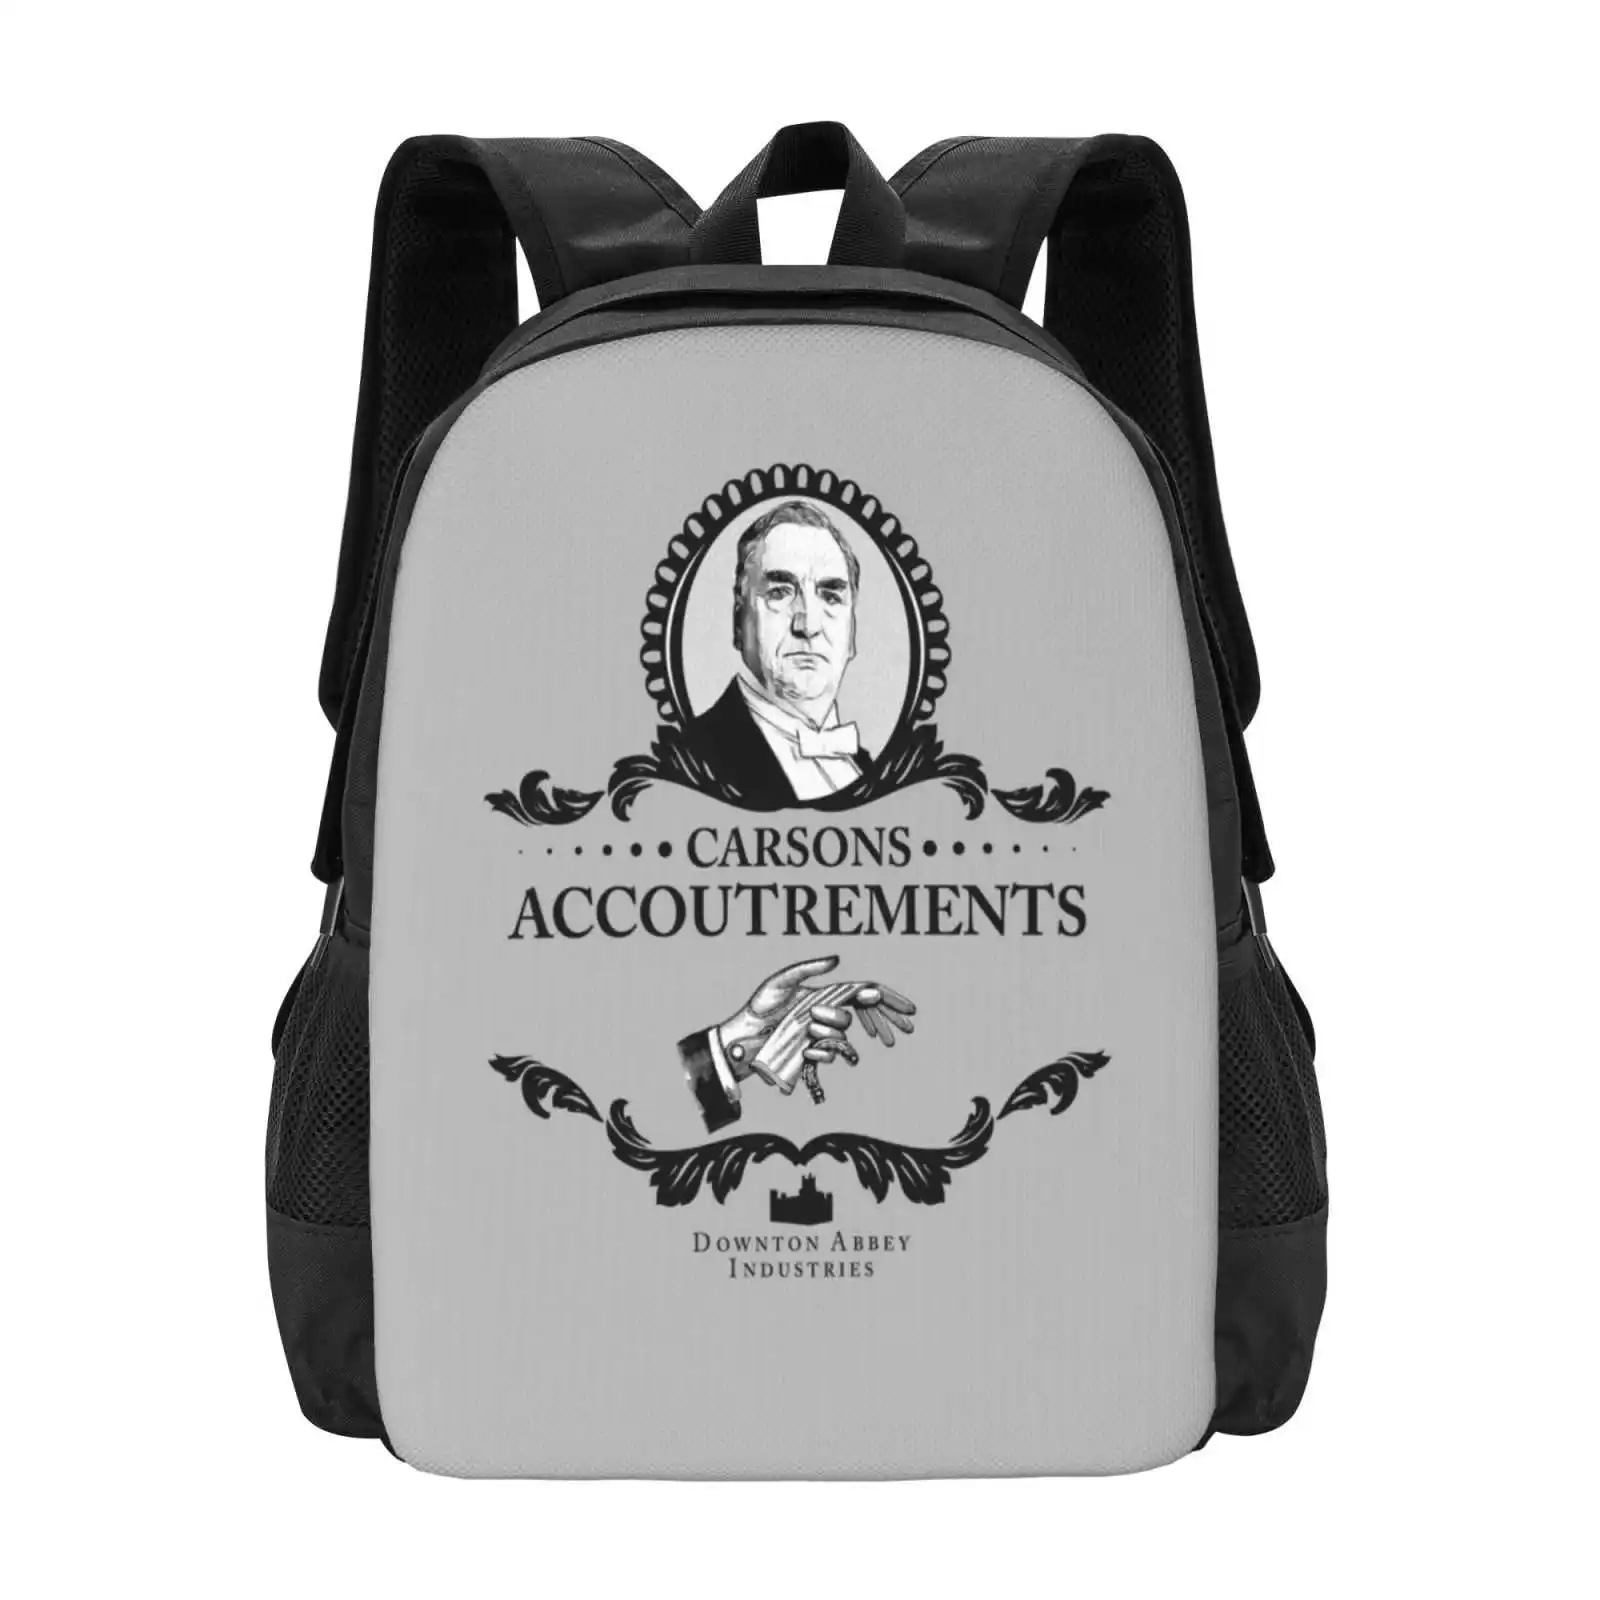 

Carsons Accoutrements-Downton Abbey Industries Large Capacity School Backpack Laptop Bags Downton Abbey Carson Obrien Mathew